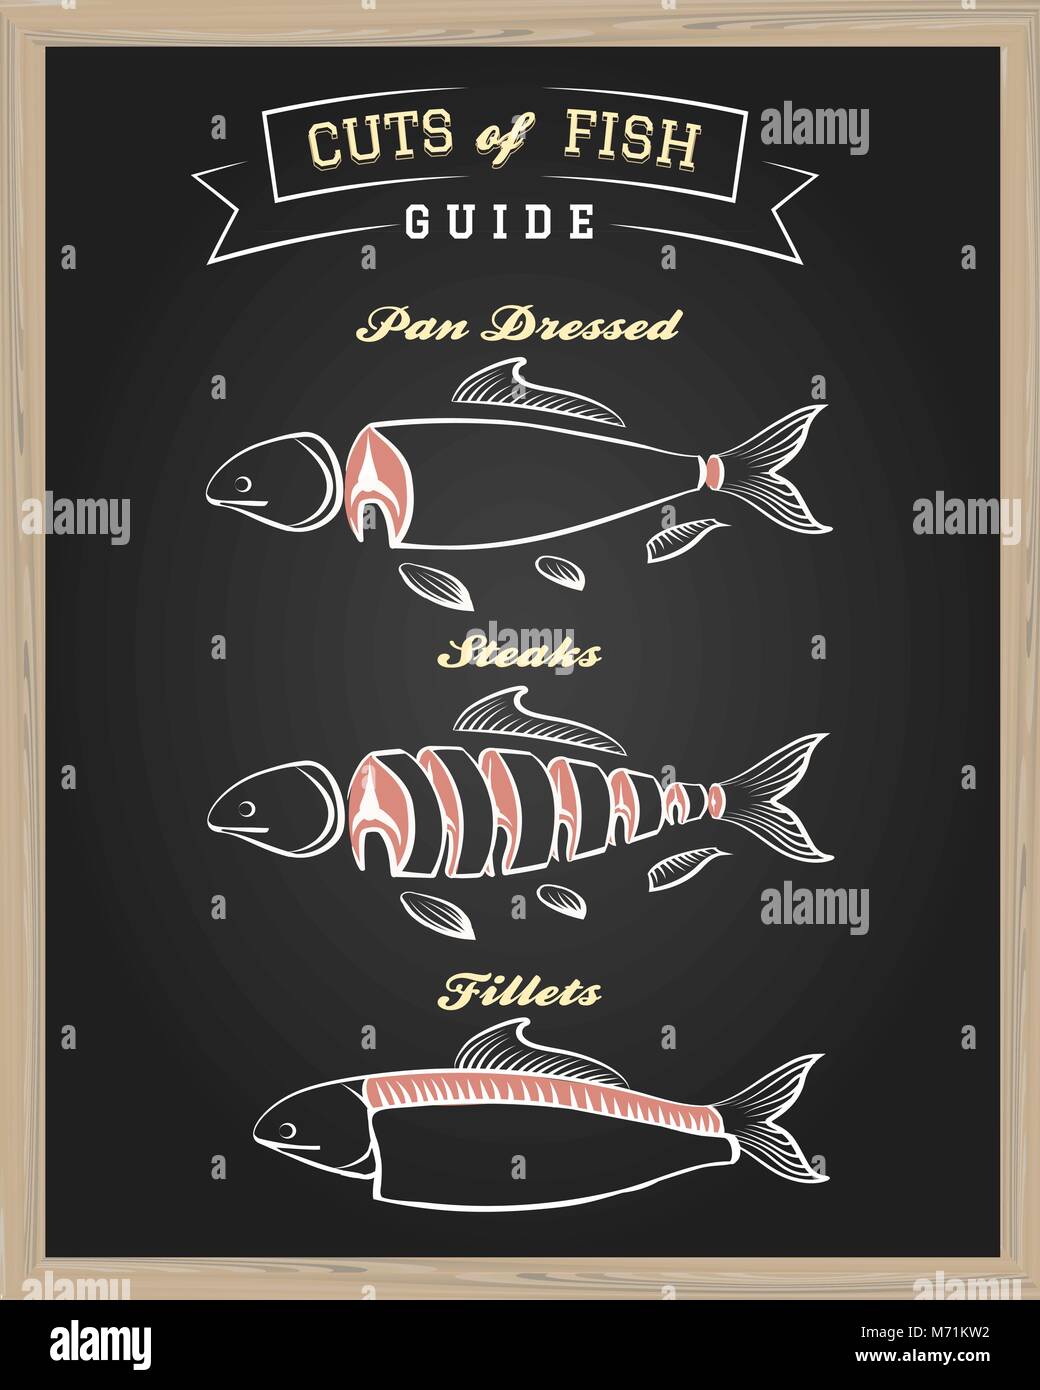 Chalkboard with Cuts of Fish Guide. Vector illustration. Stock Vector